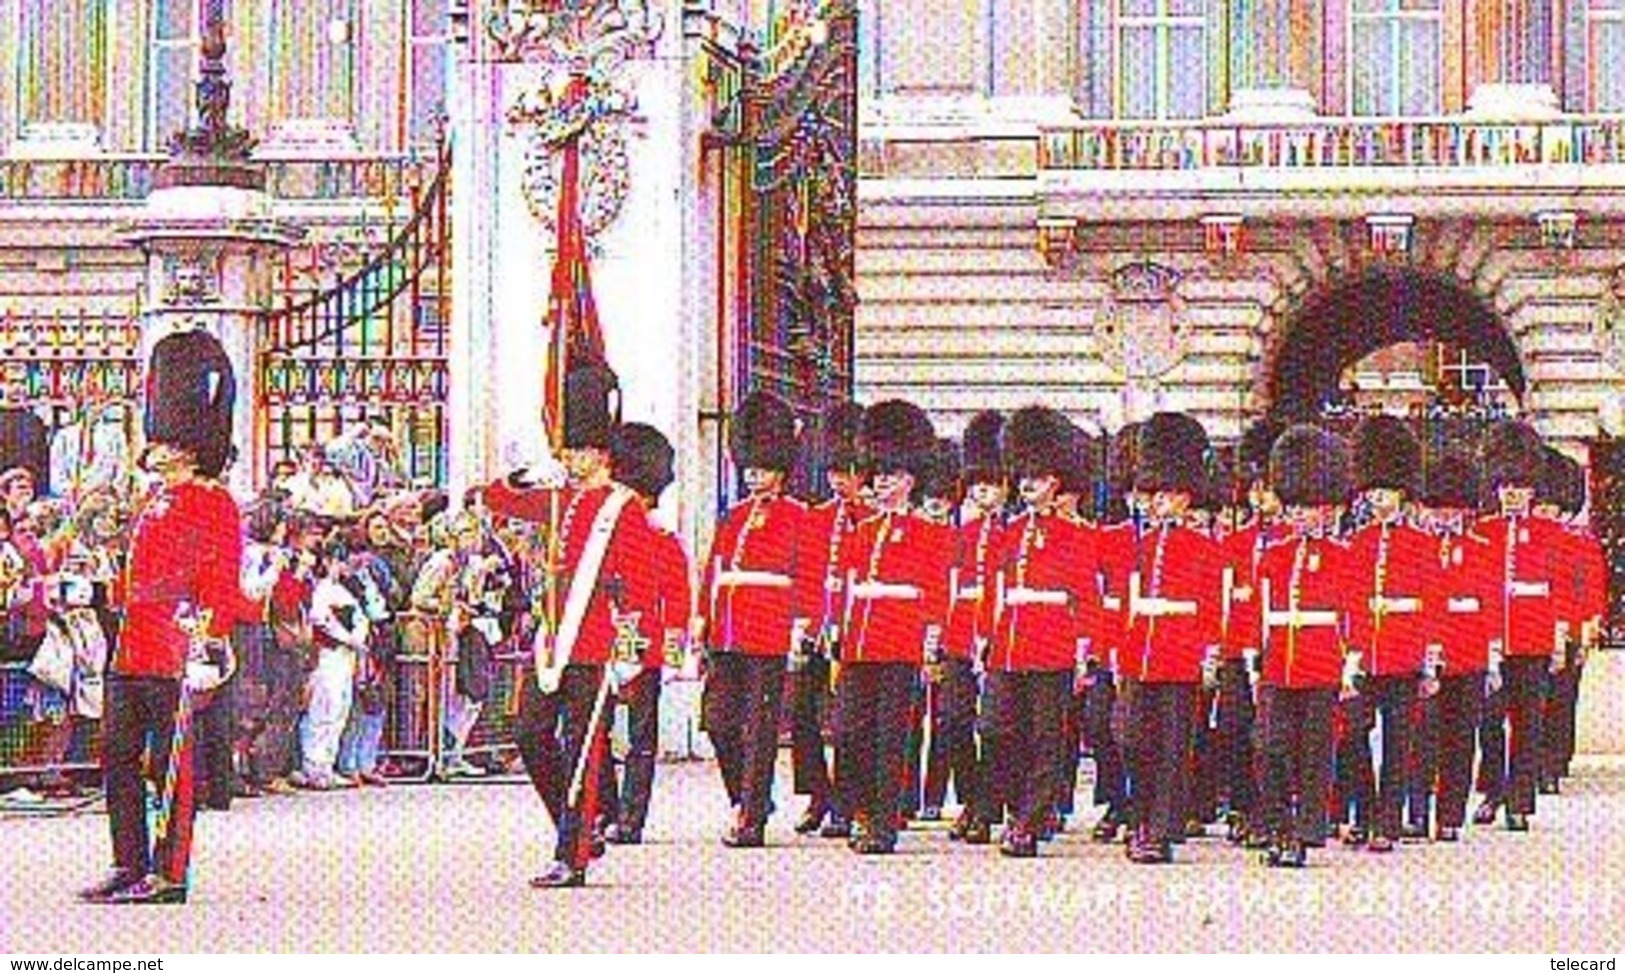 Télécarte Japon ANGLETERRE * ENGLAND * LONDON *  GUARDS (356) GREAT BRITAIN Related *  Phonecard Japan * - Paysages